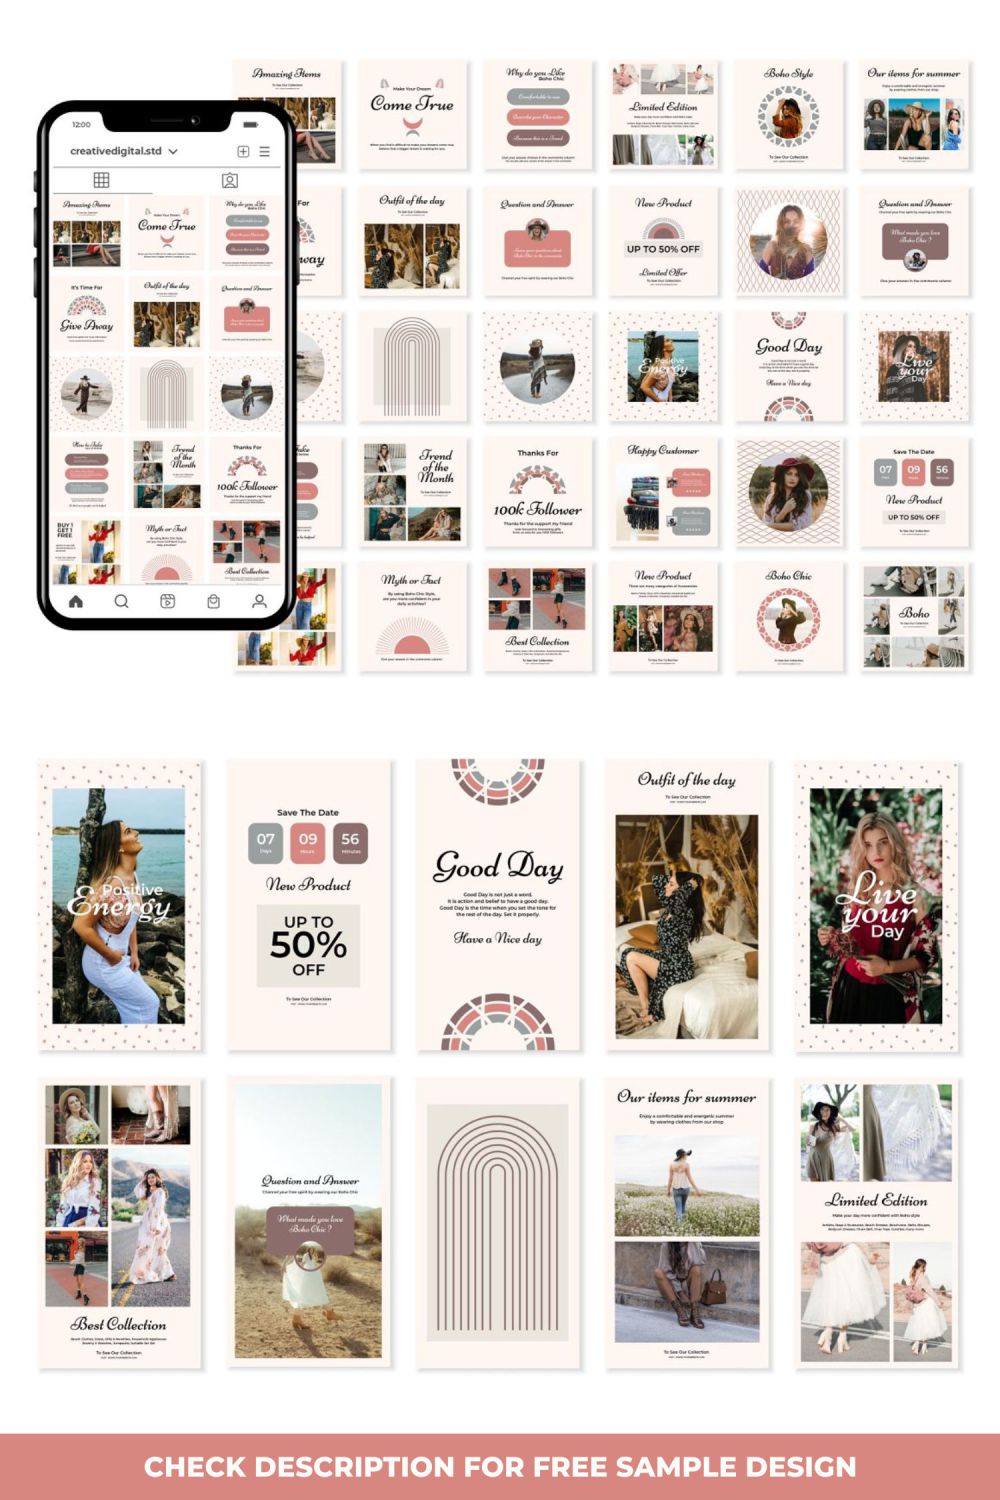 Boho Chic Story and Icon Social Media Template Pinterest Image.